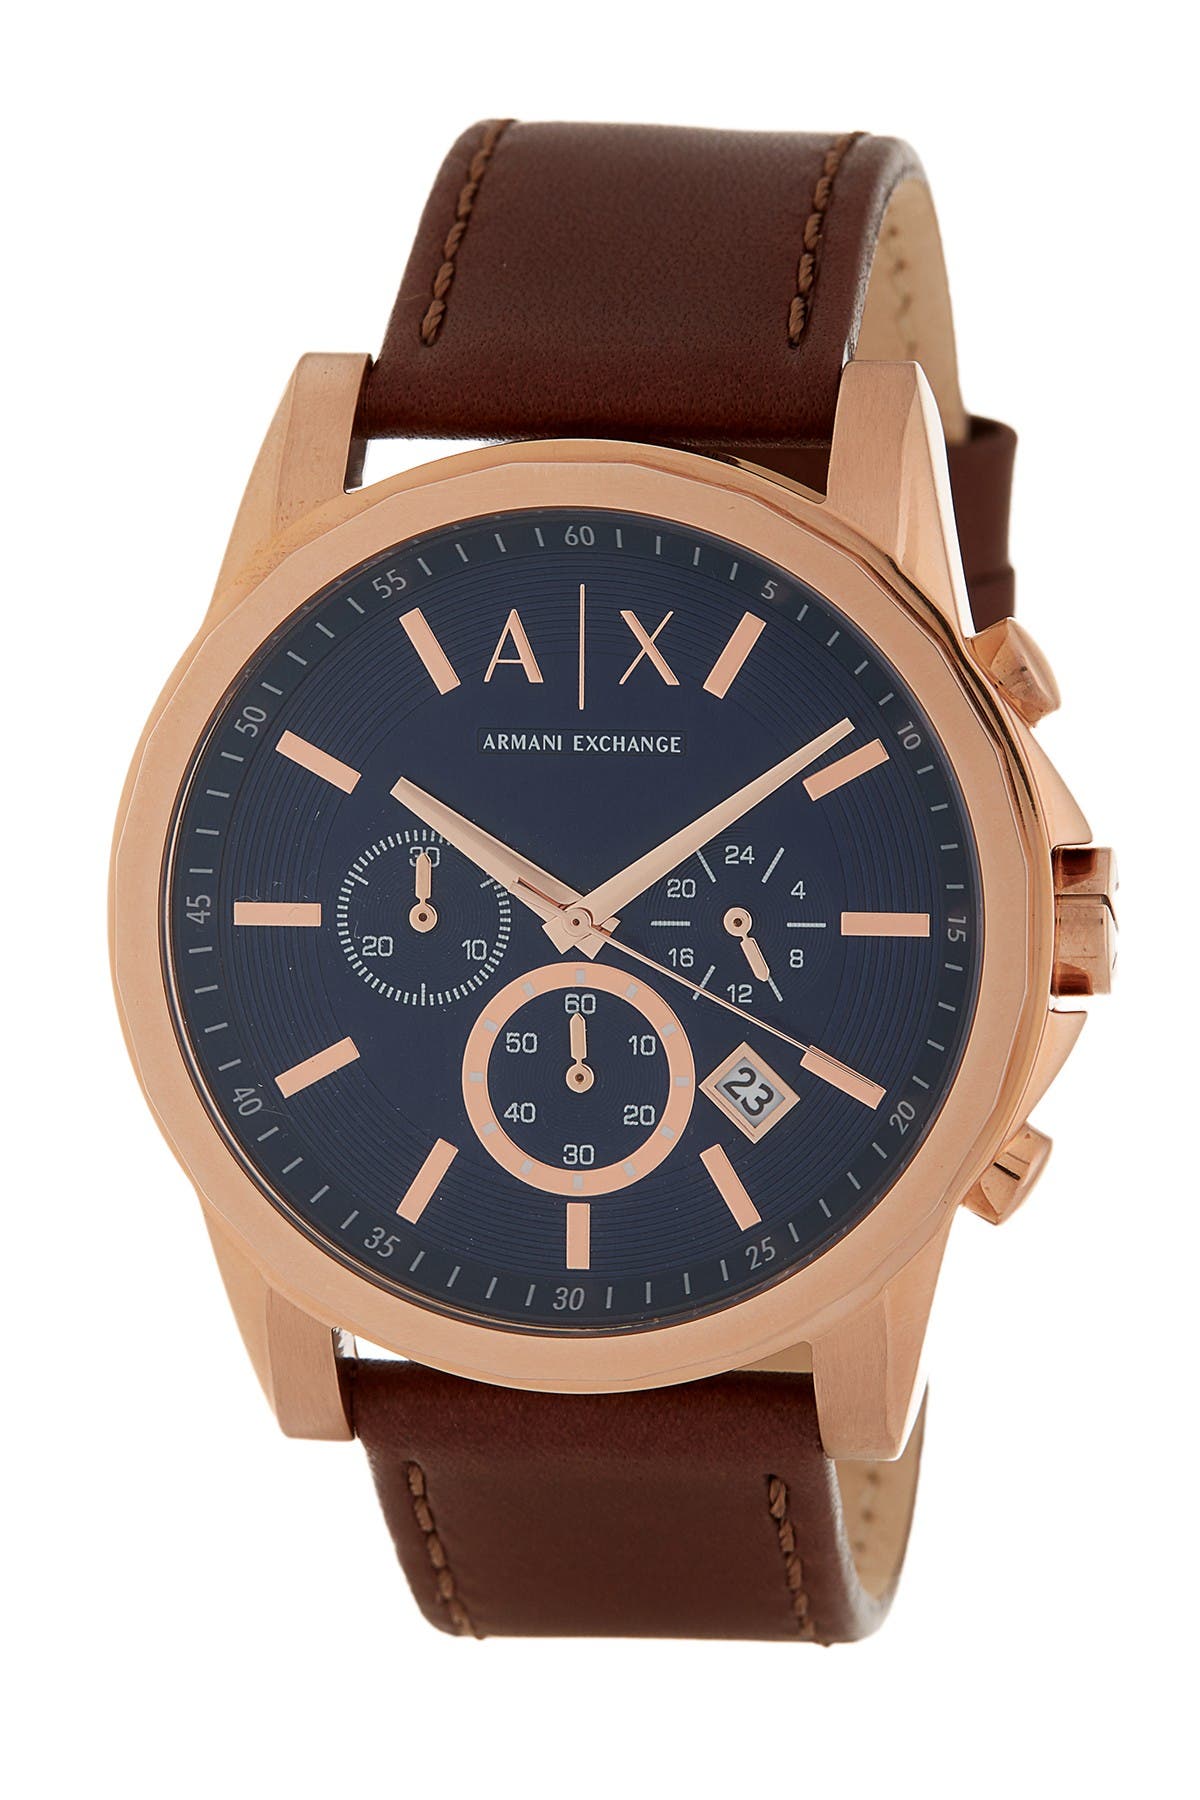 Ax Armani Exchange Men's Analog Leather Strap In Brown